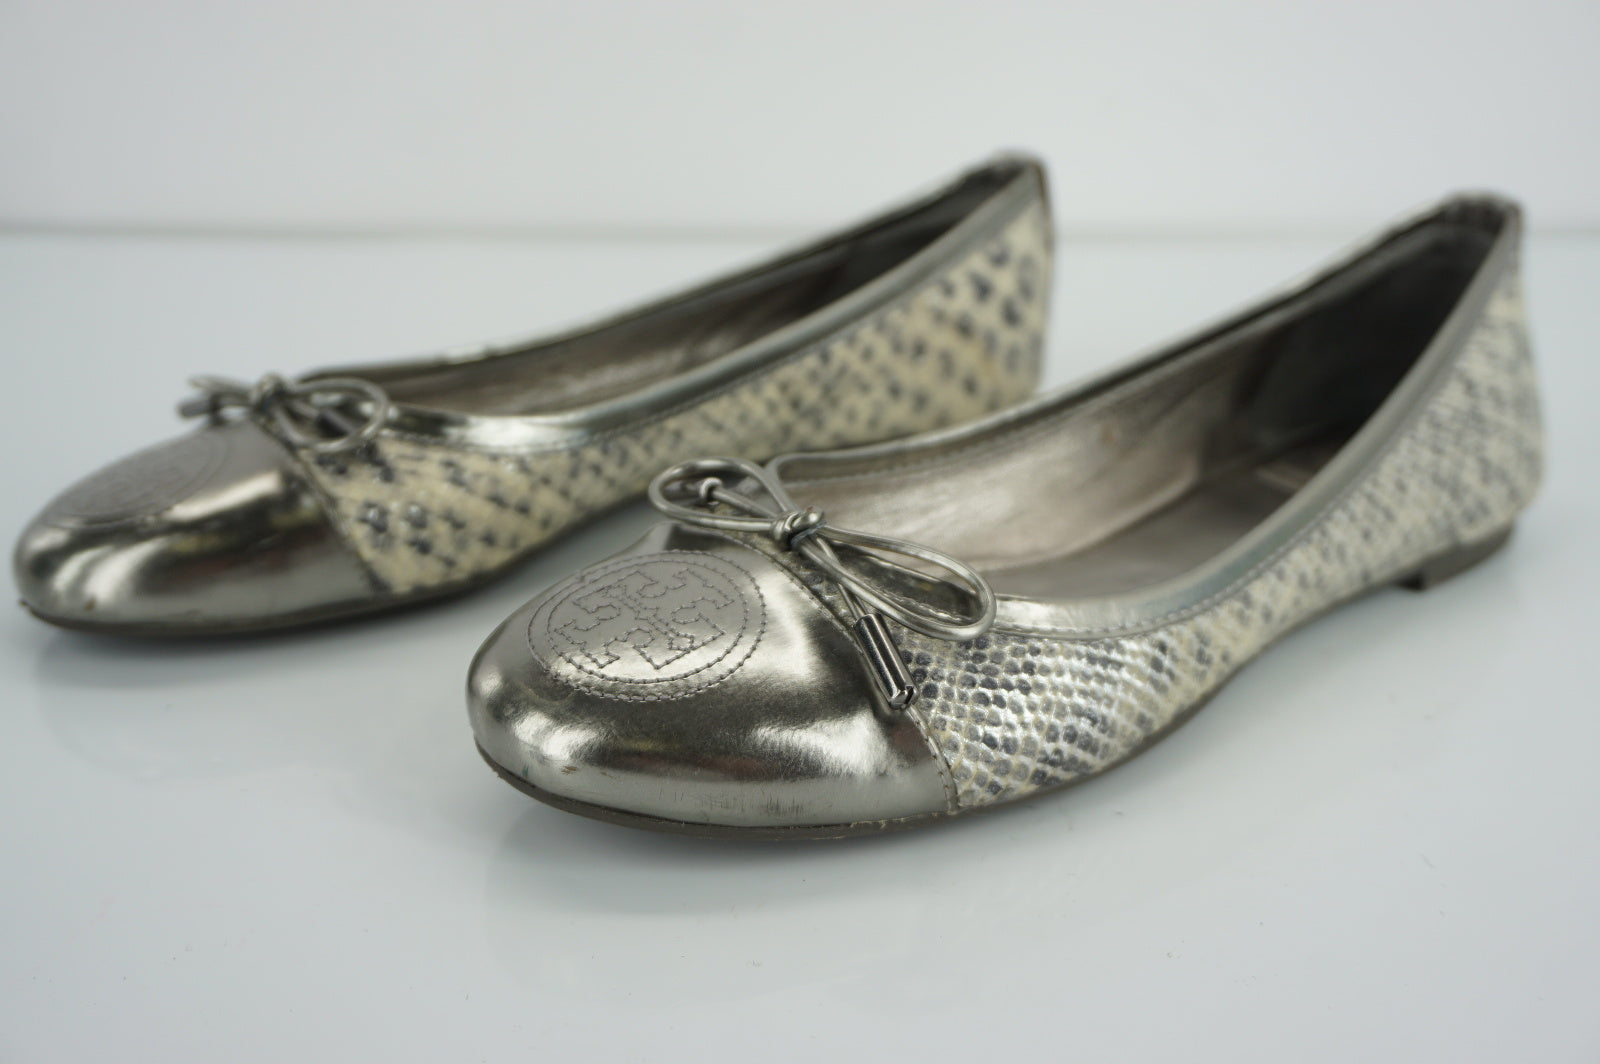 Tory Burch Womens Claremont Ballet Flat Silver Snake Leather Size 7